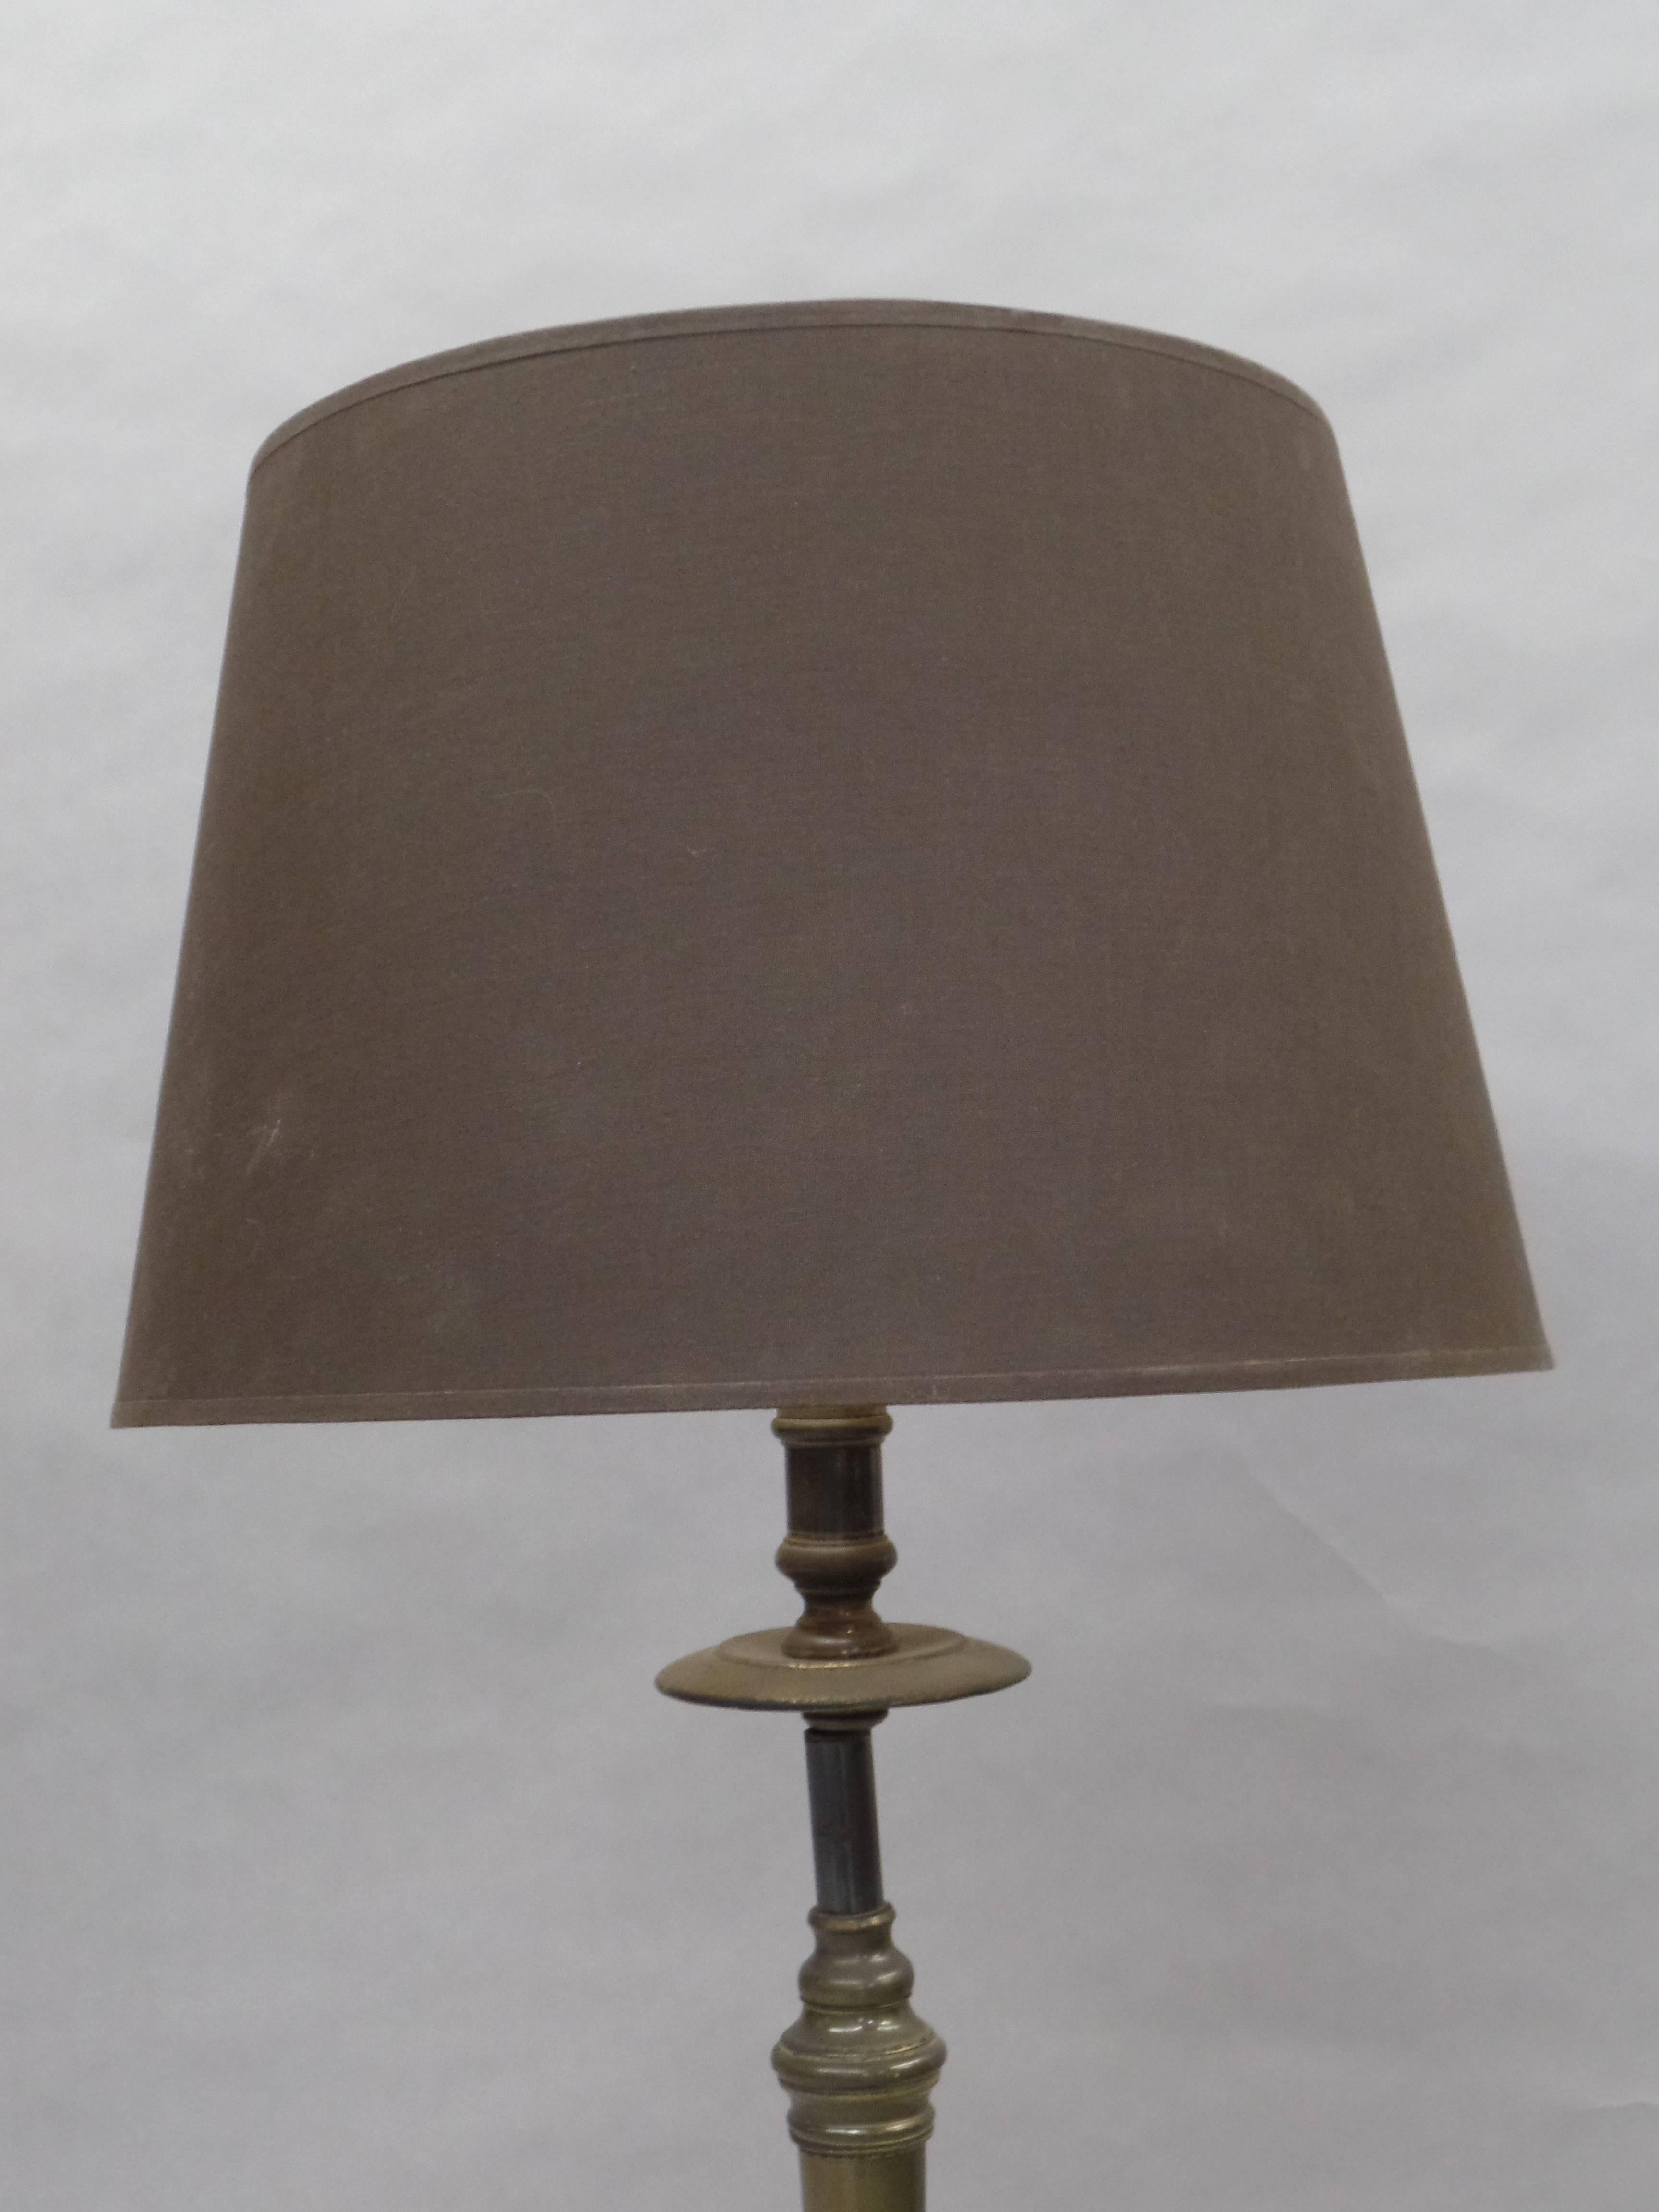 Pair of French Midcentury Neoclassical Candlestick Form Table Lamps, 1930 In Fair Condition For Sale In New York, NY